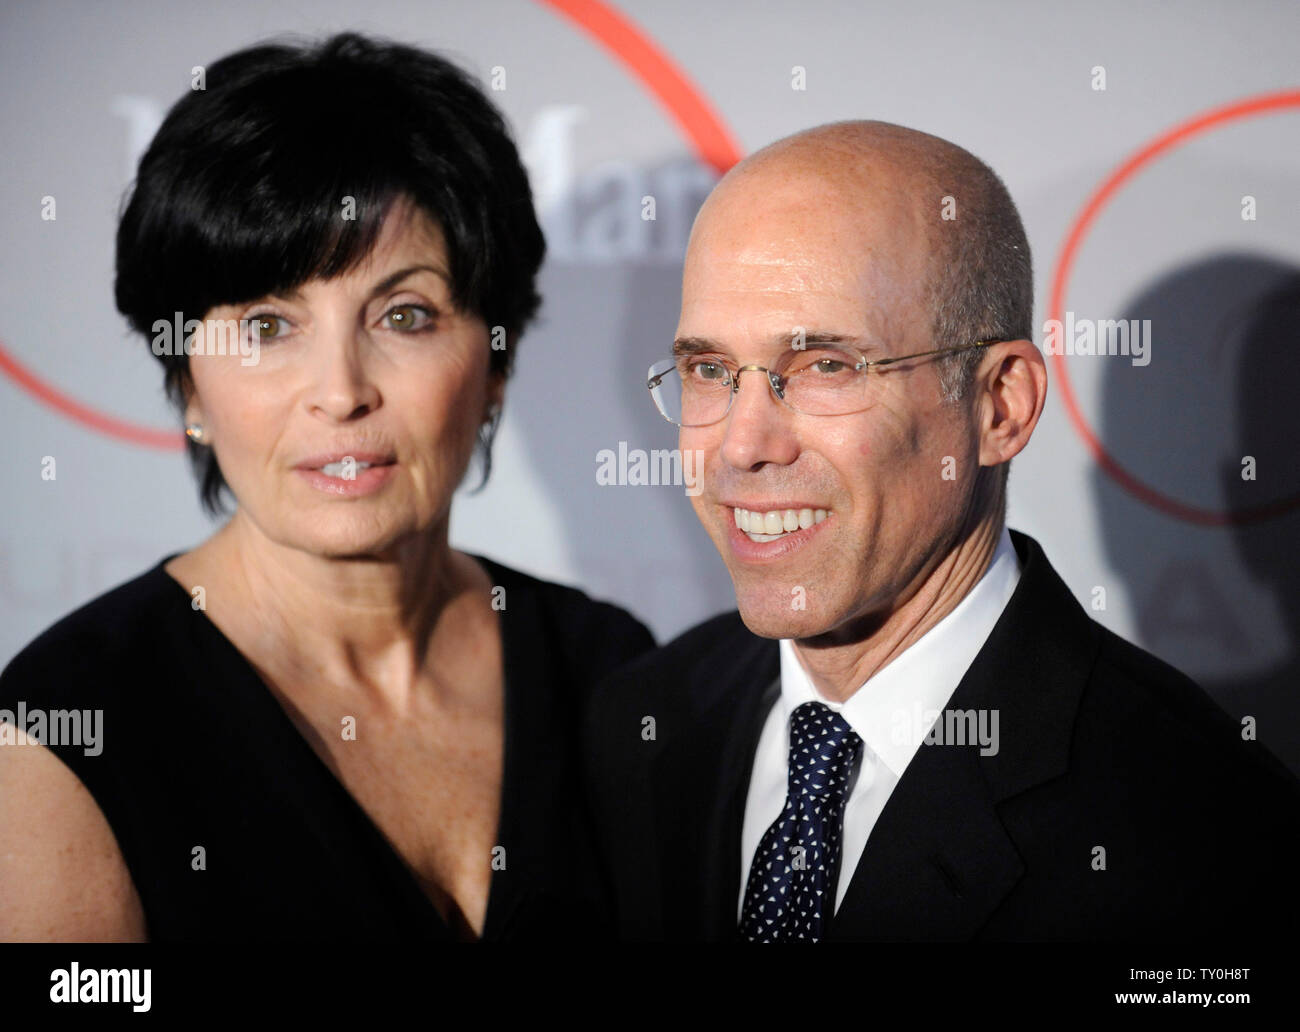 Jeffrey Katzenberg (R) and wife Marilyn attend the 2008 Crystal + Lucy Awards gala in Beverly Hills, California on June 17, 2008. (UPI Photo/ Phil McCarten) Stock Photo